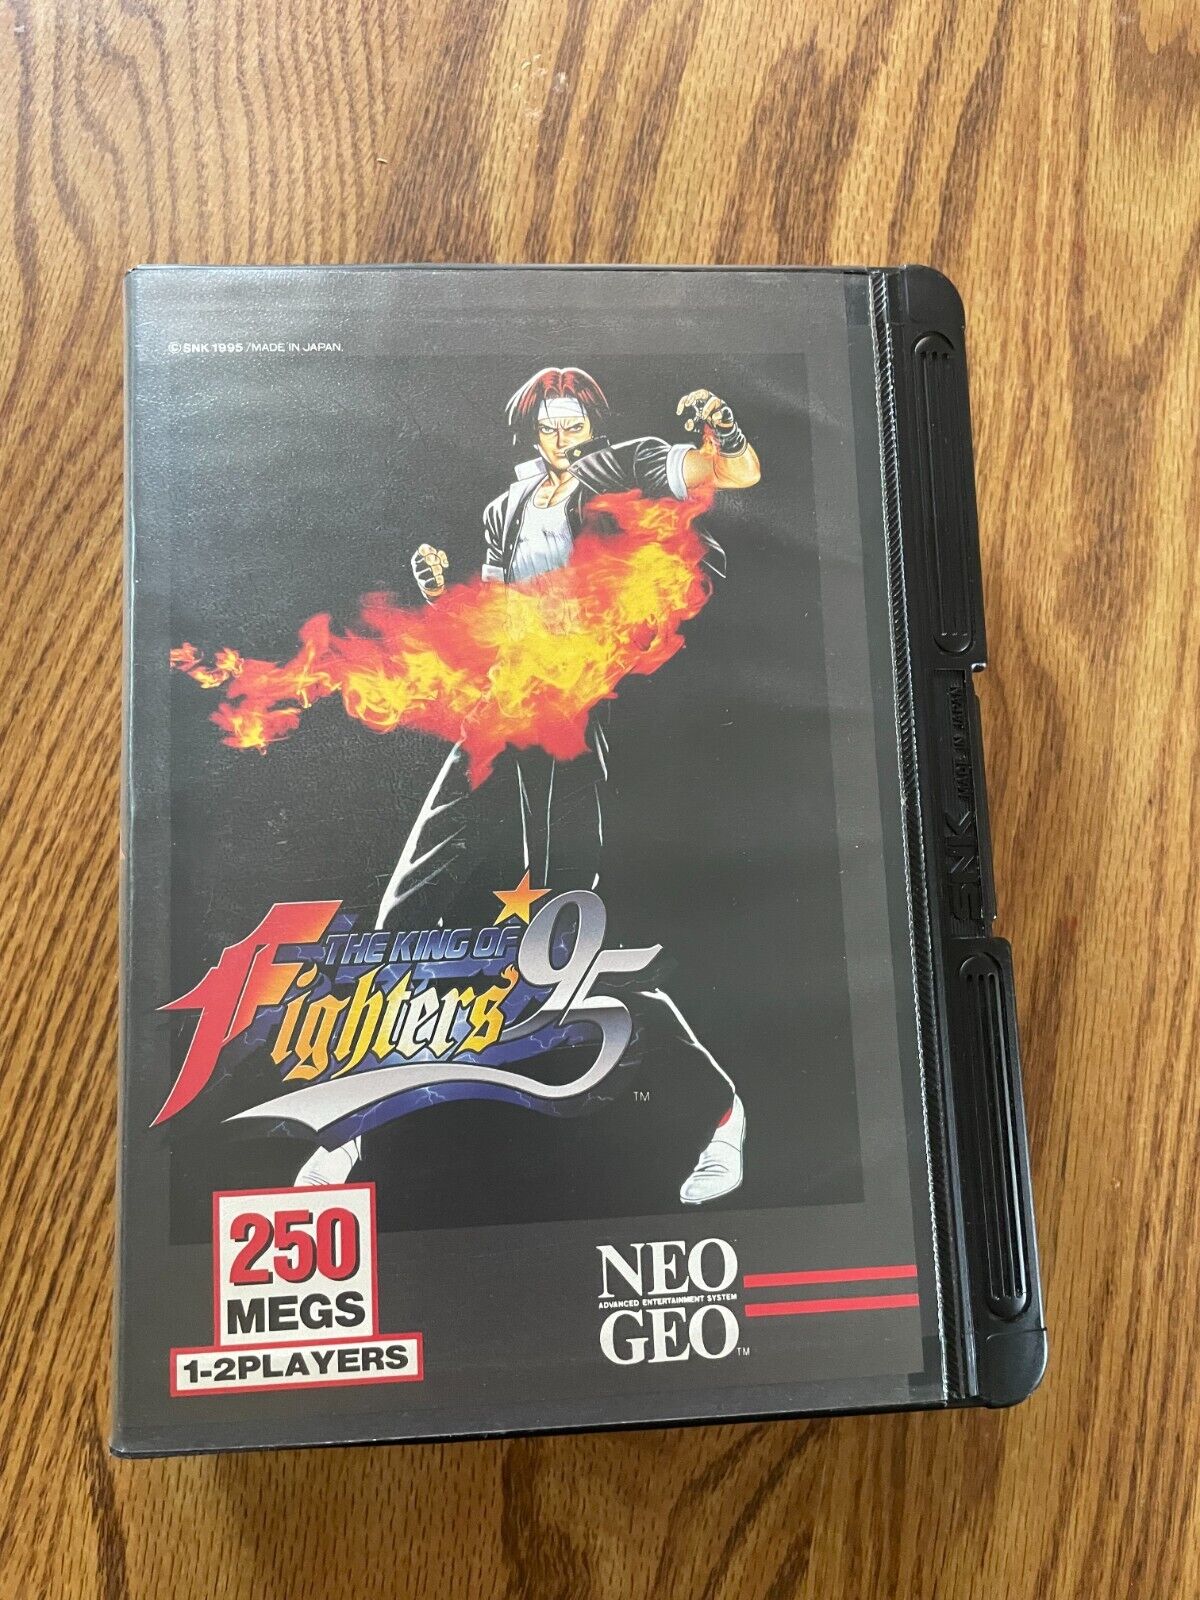 Neo Geo THE KING OF FIGHTERS 95 AES - Complete US Version